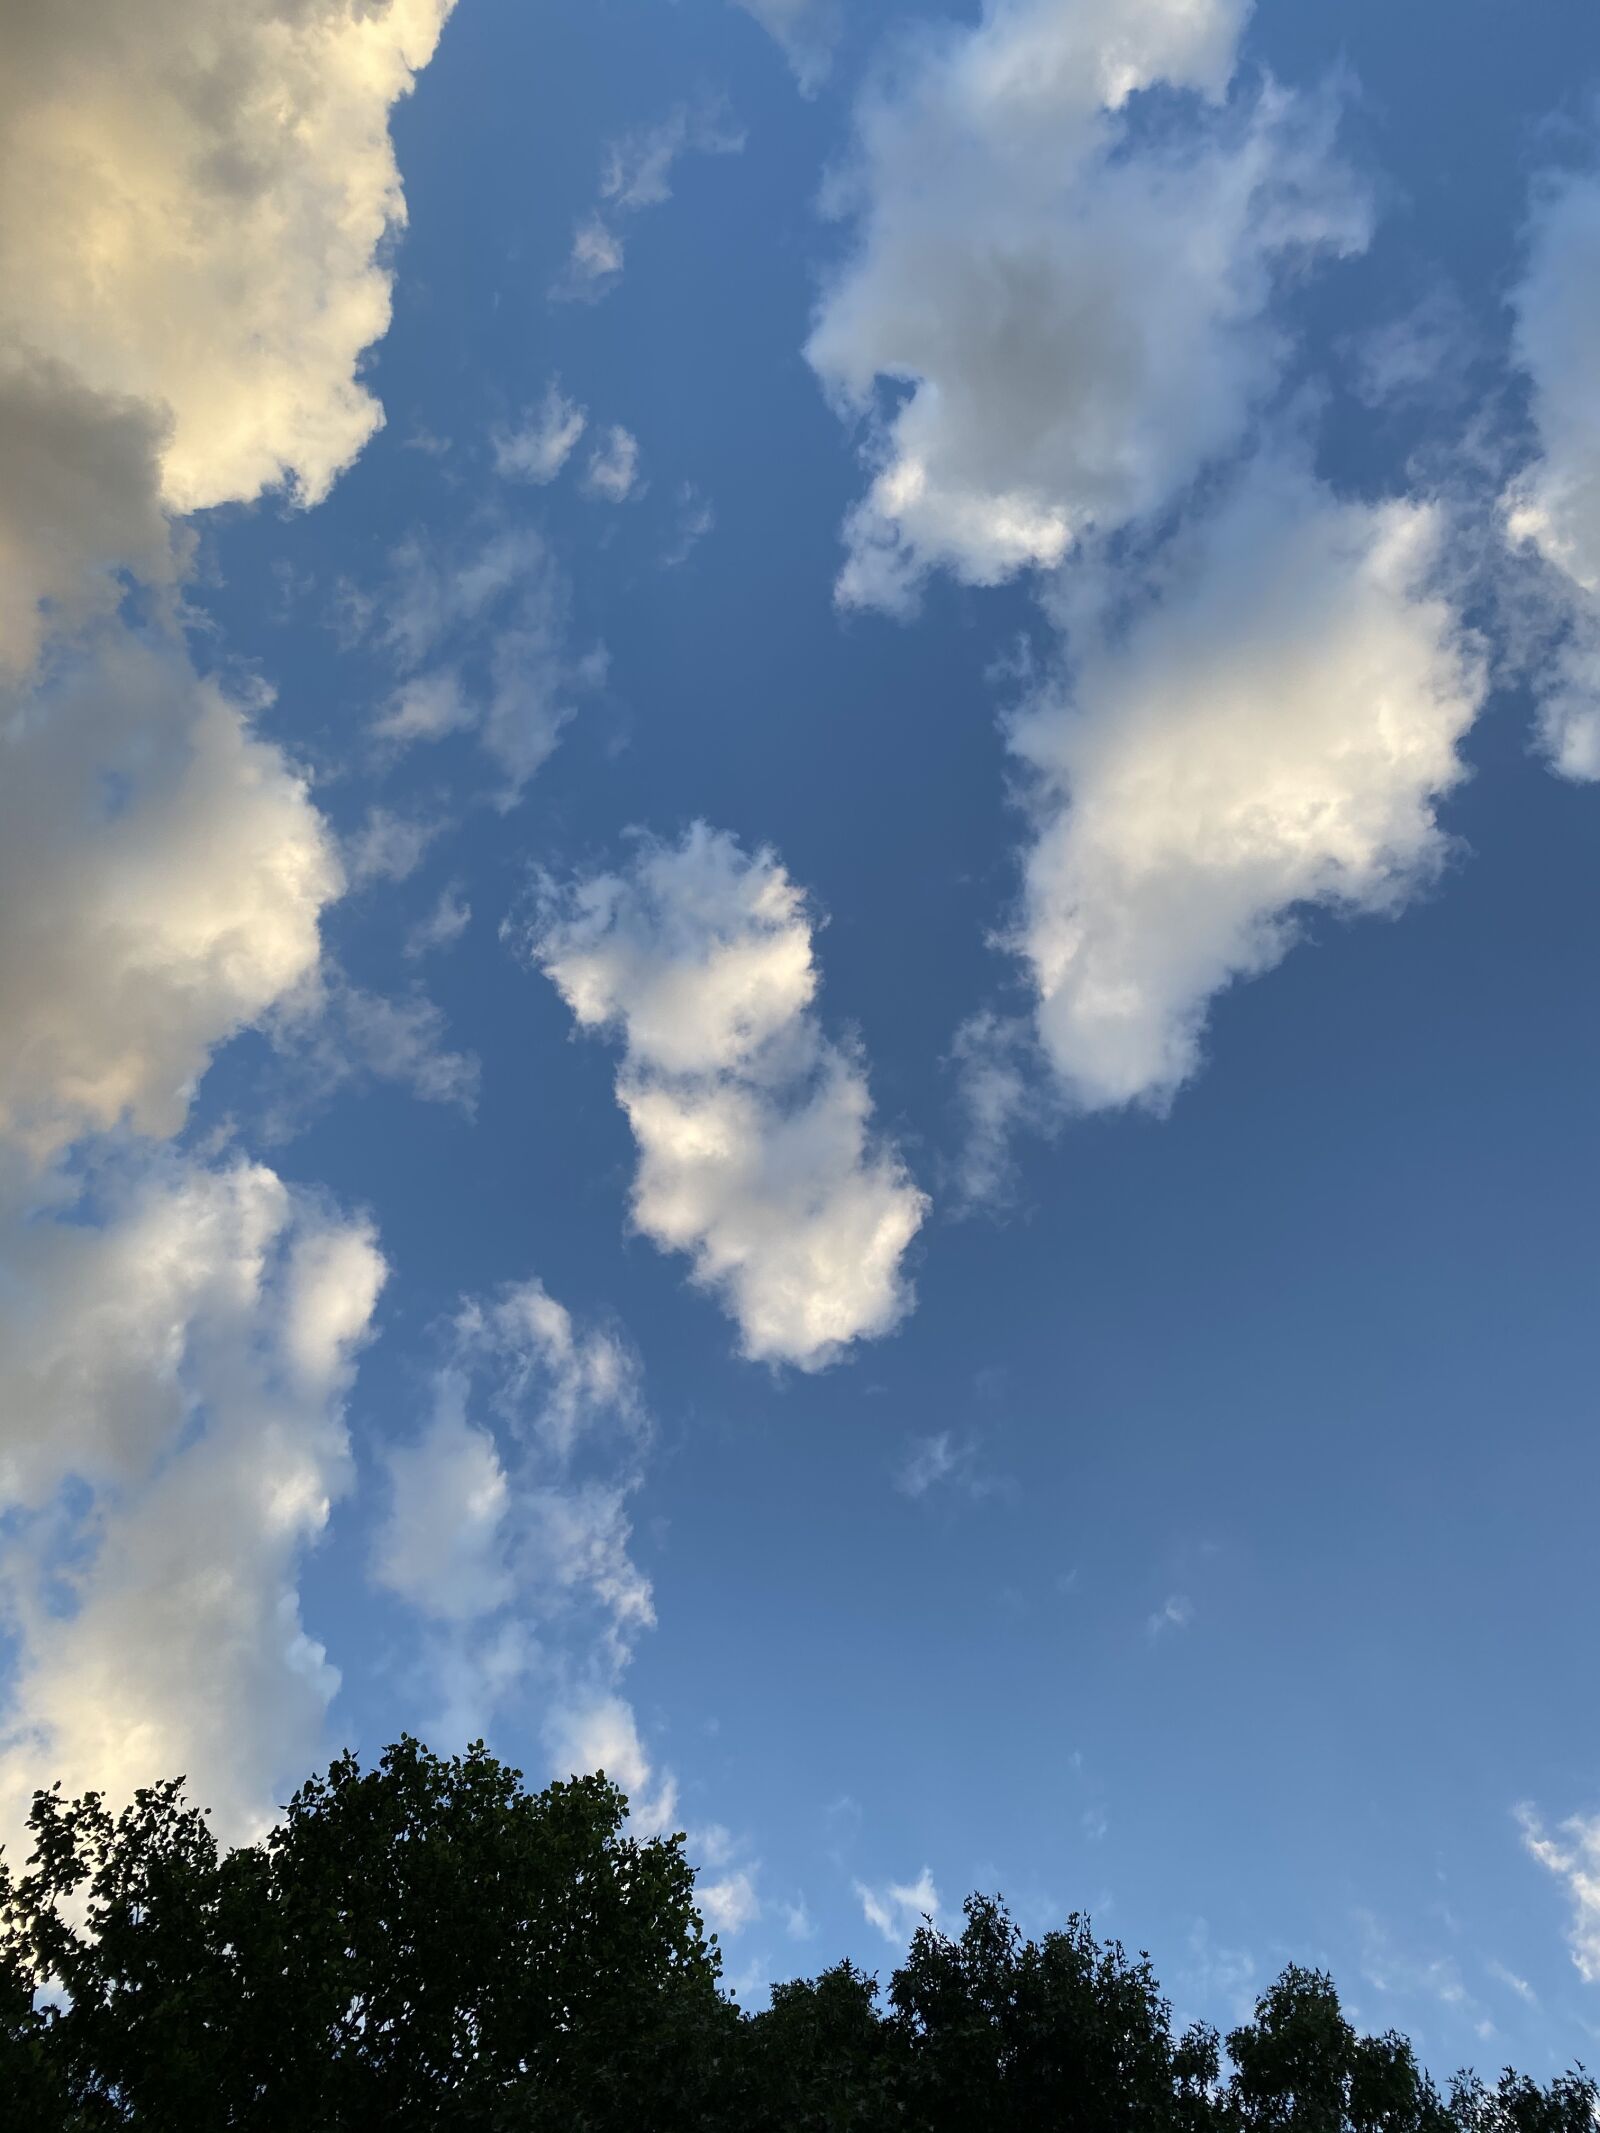 Apple iPhone 11 Pro Max sample photo. Sky, heaven, clouds photography